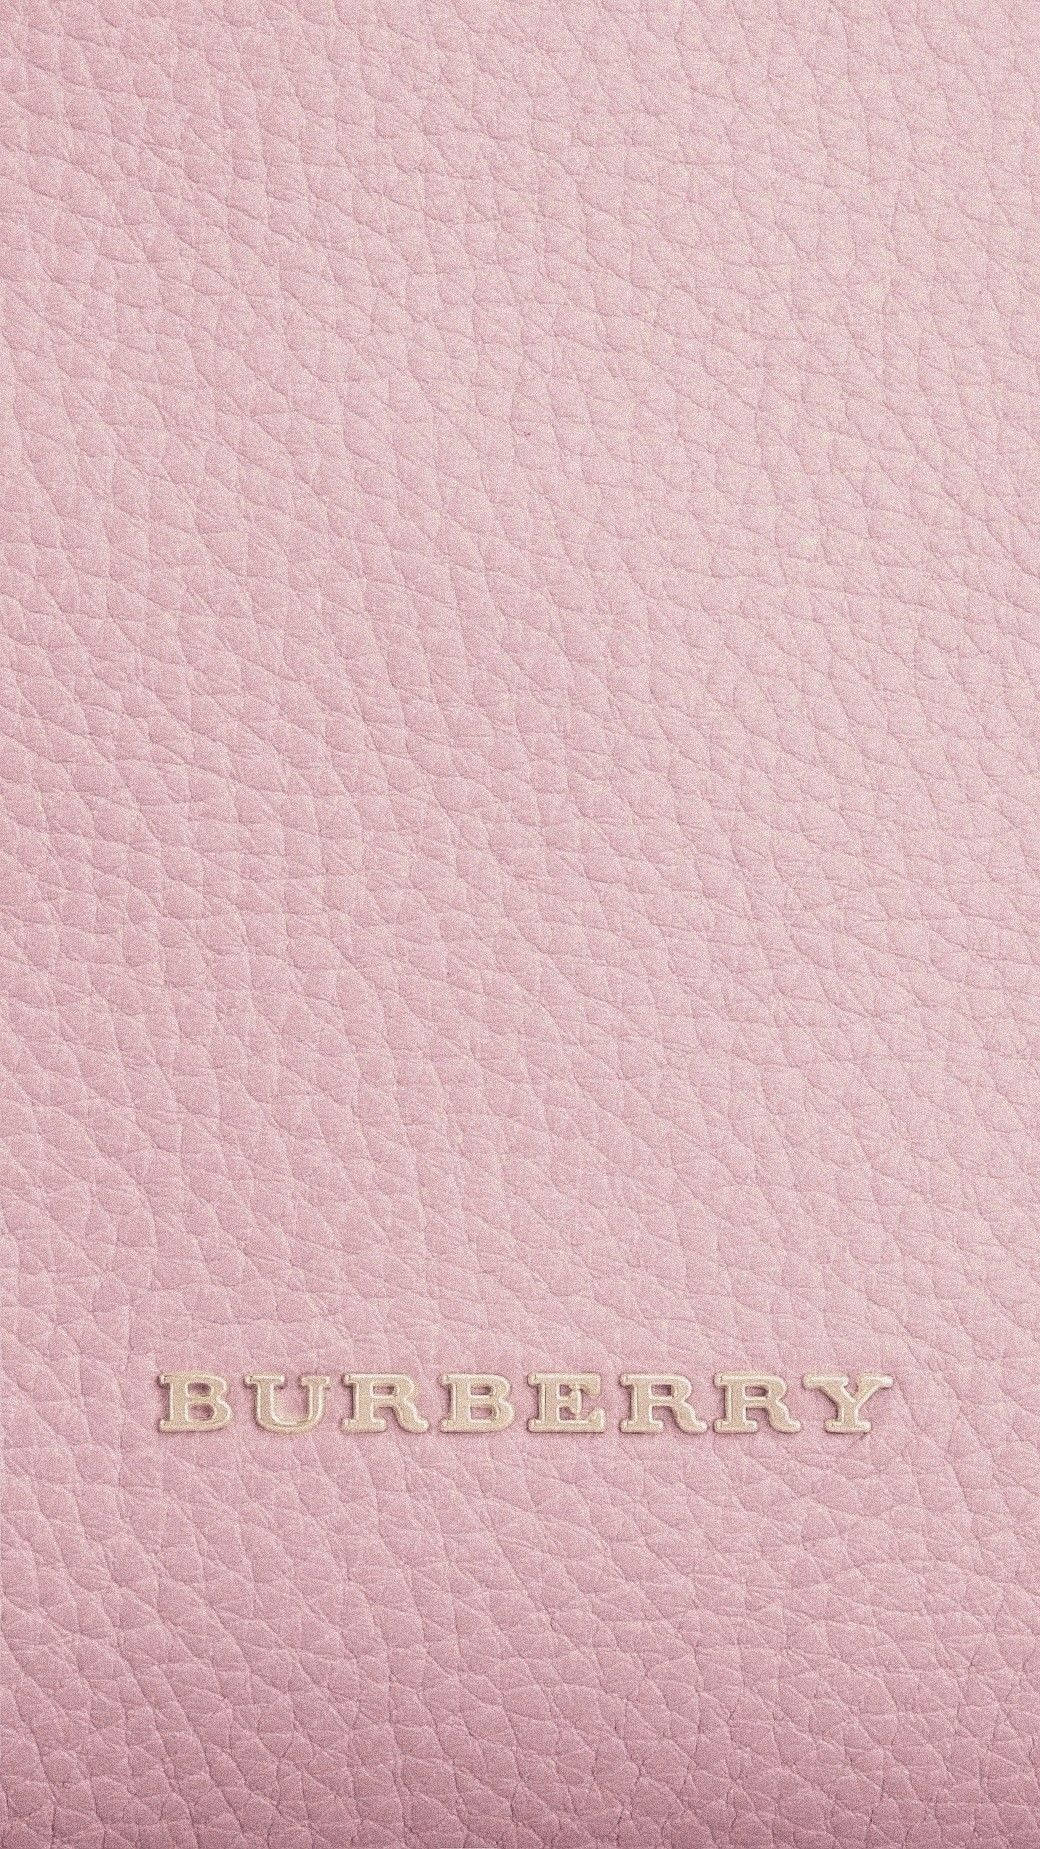 Burberry 1040X1849 Wallpaper and Background Image